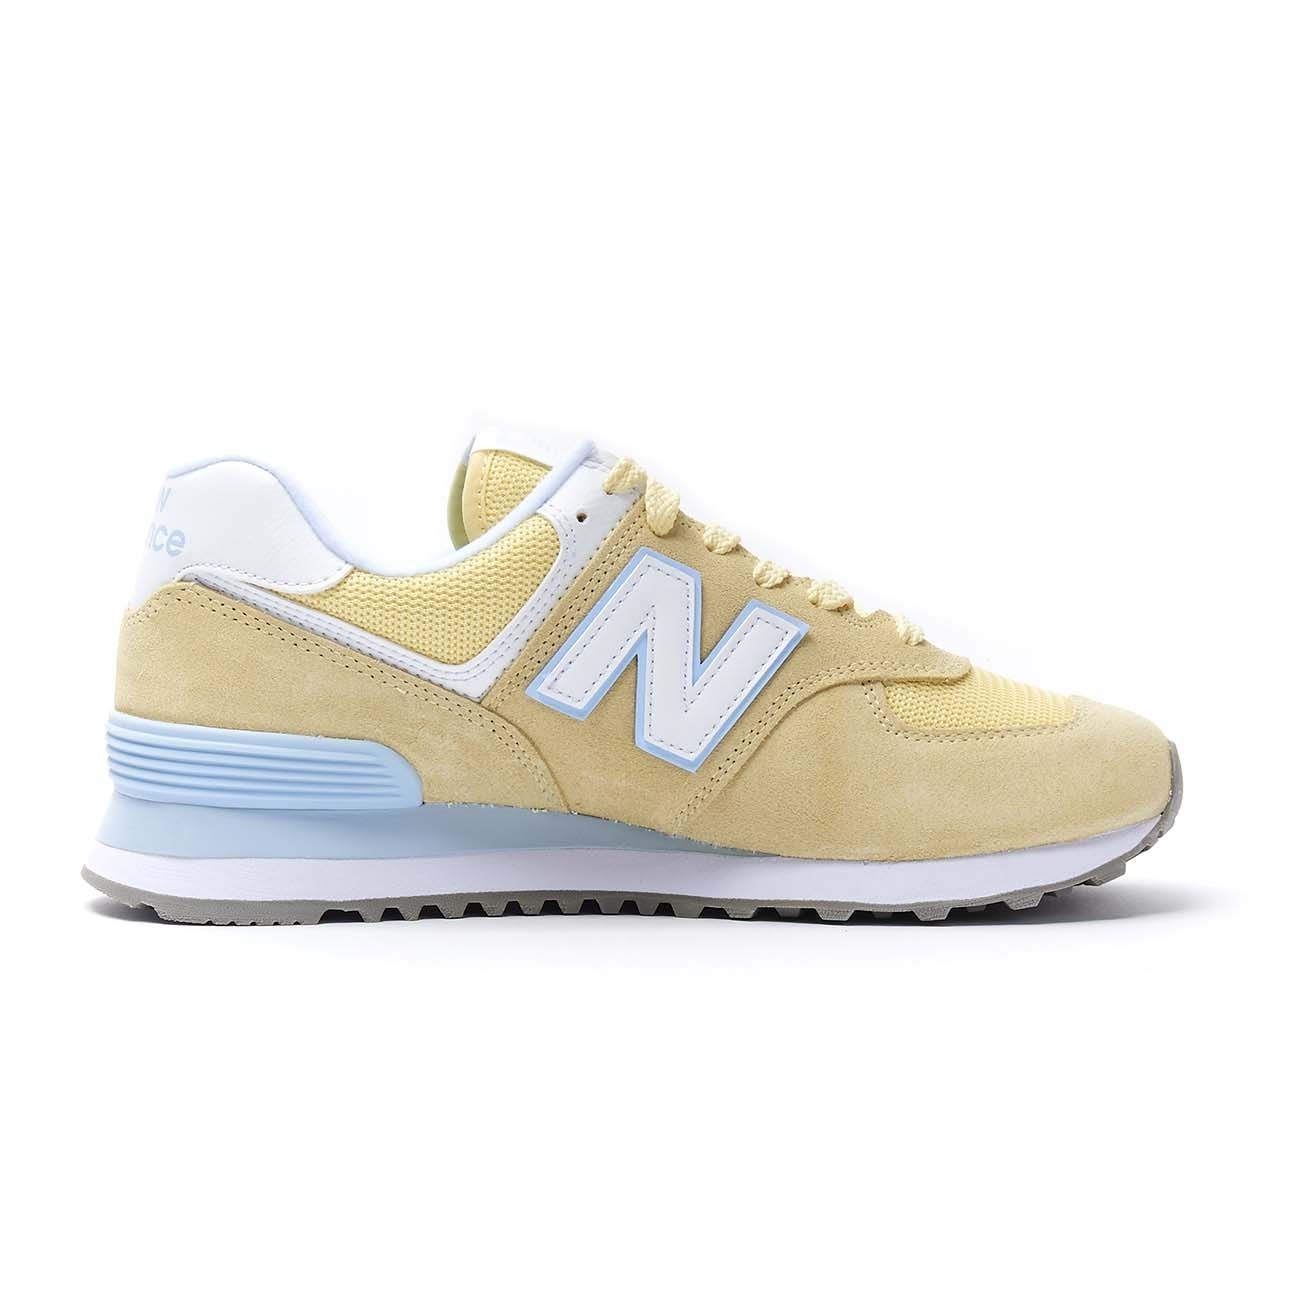 new balance 574 yellow suede/mesh trainers